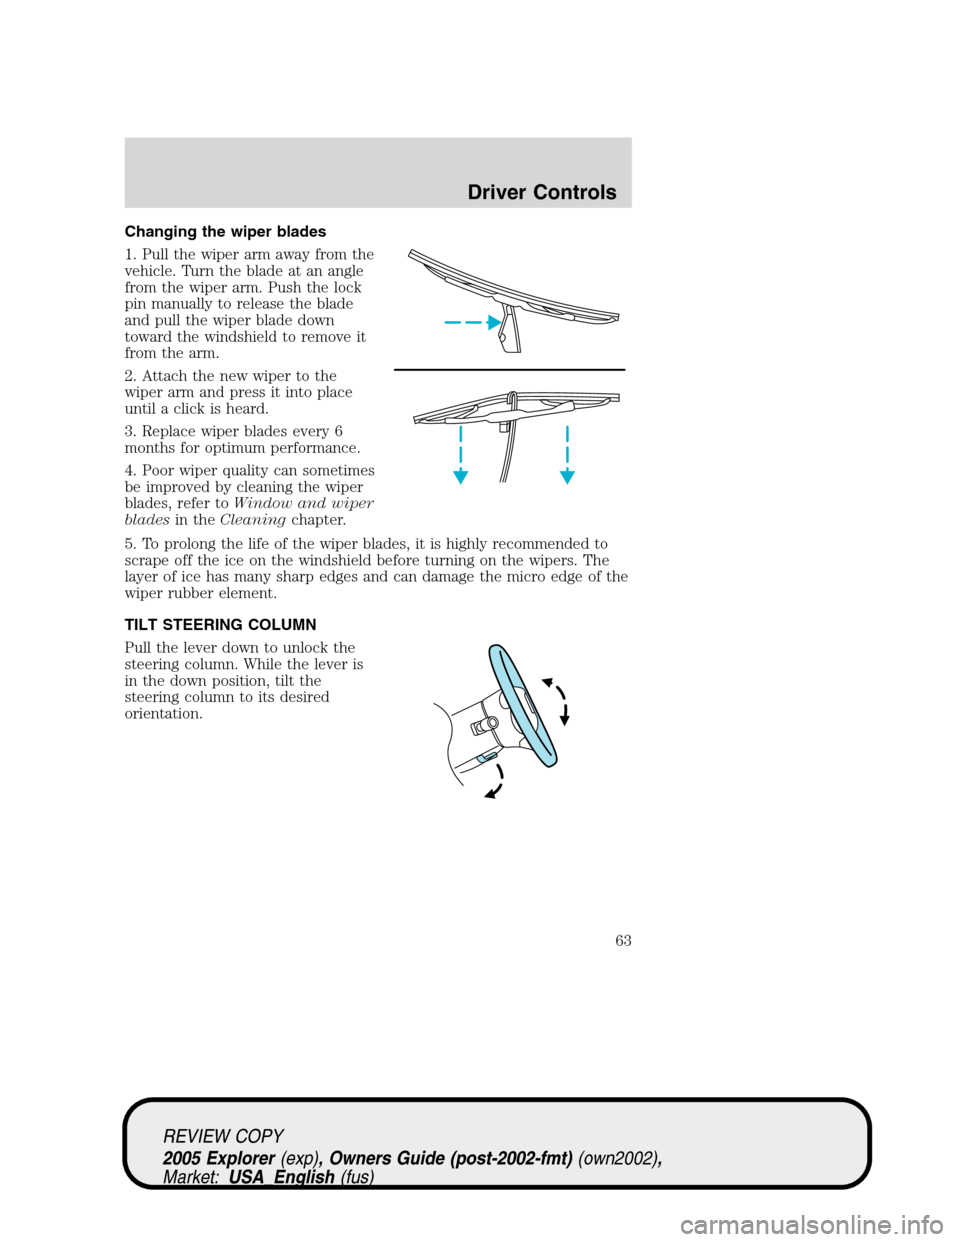 FORD EXPLORER 2005 3.G Owners Manual Changing the wiper blades
1. Pull the wiper arm away from the
vehicle. Turn the blade at an angle
from the wiper arm. Push the lock
pin manually to release the blade
and pull the wiper blade down
towa